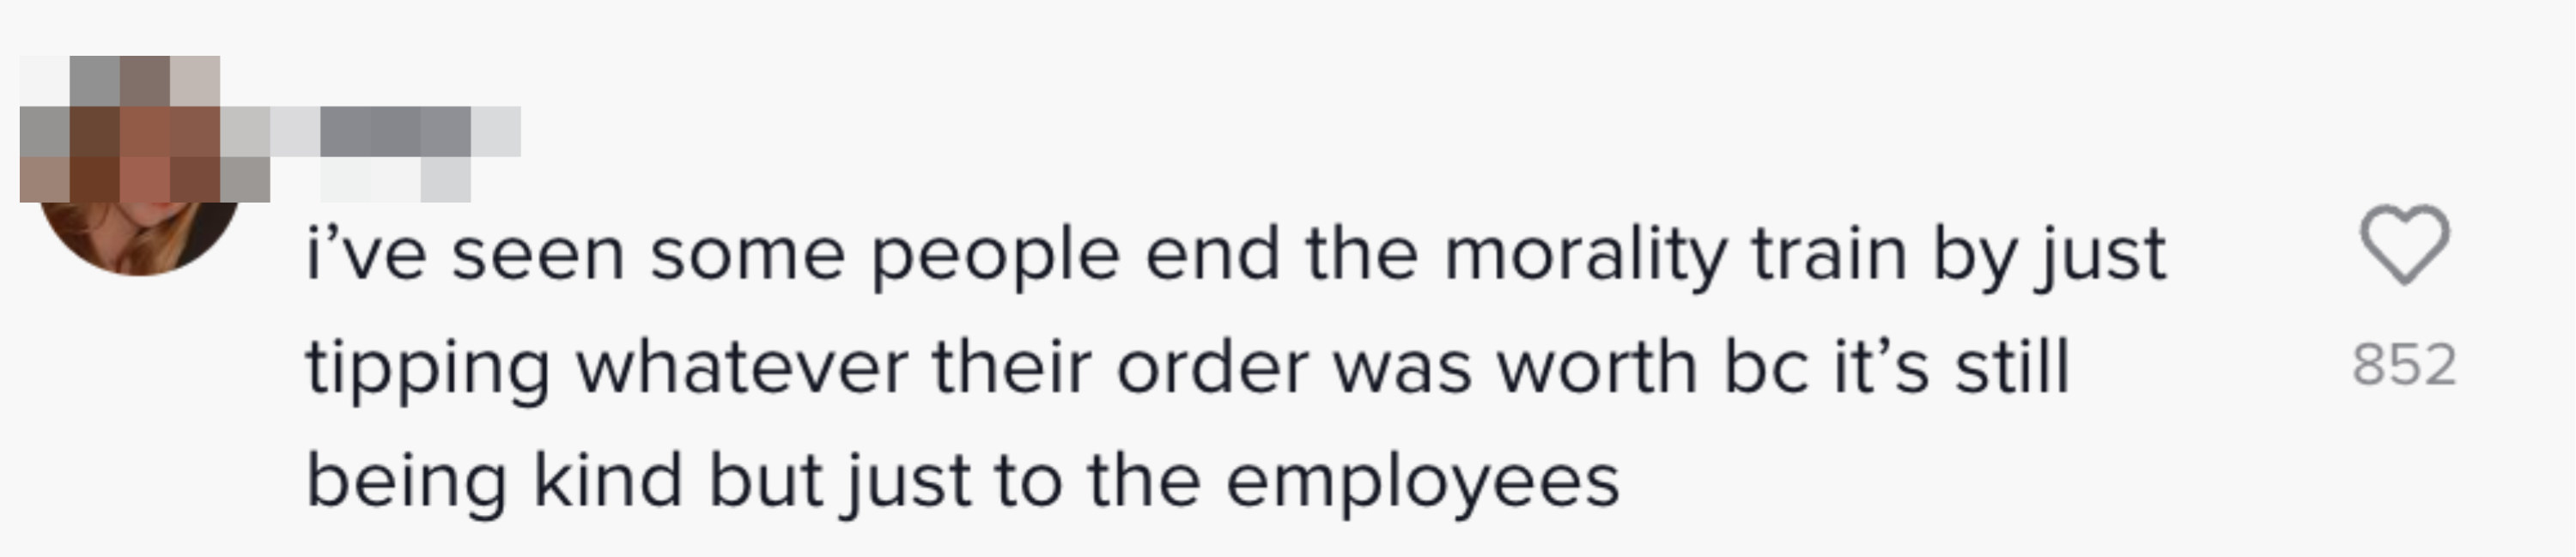 Comment: &quot;I&#x27;ve seen some people end the morality train by just tipping whatever their order was worth bc it&#x27;s still being kind but just to the employees&quot;